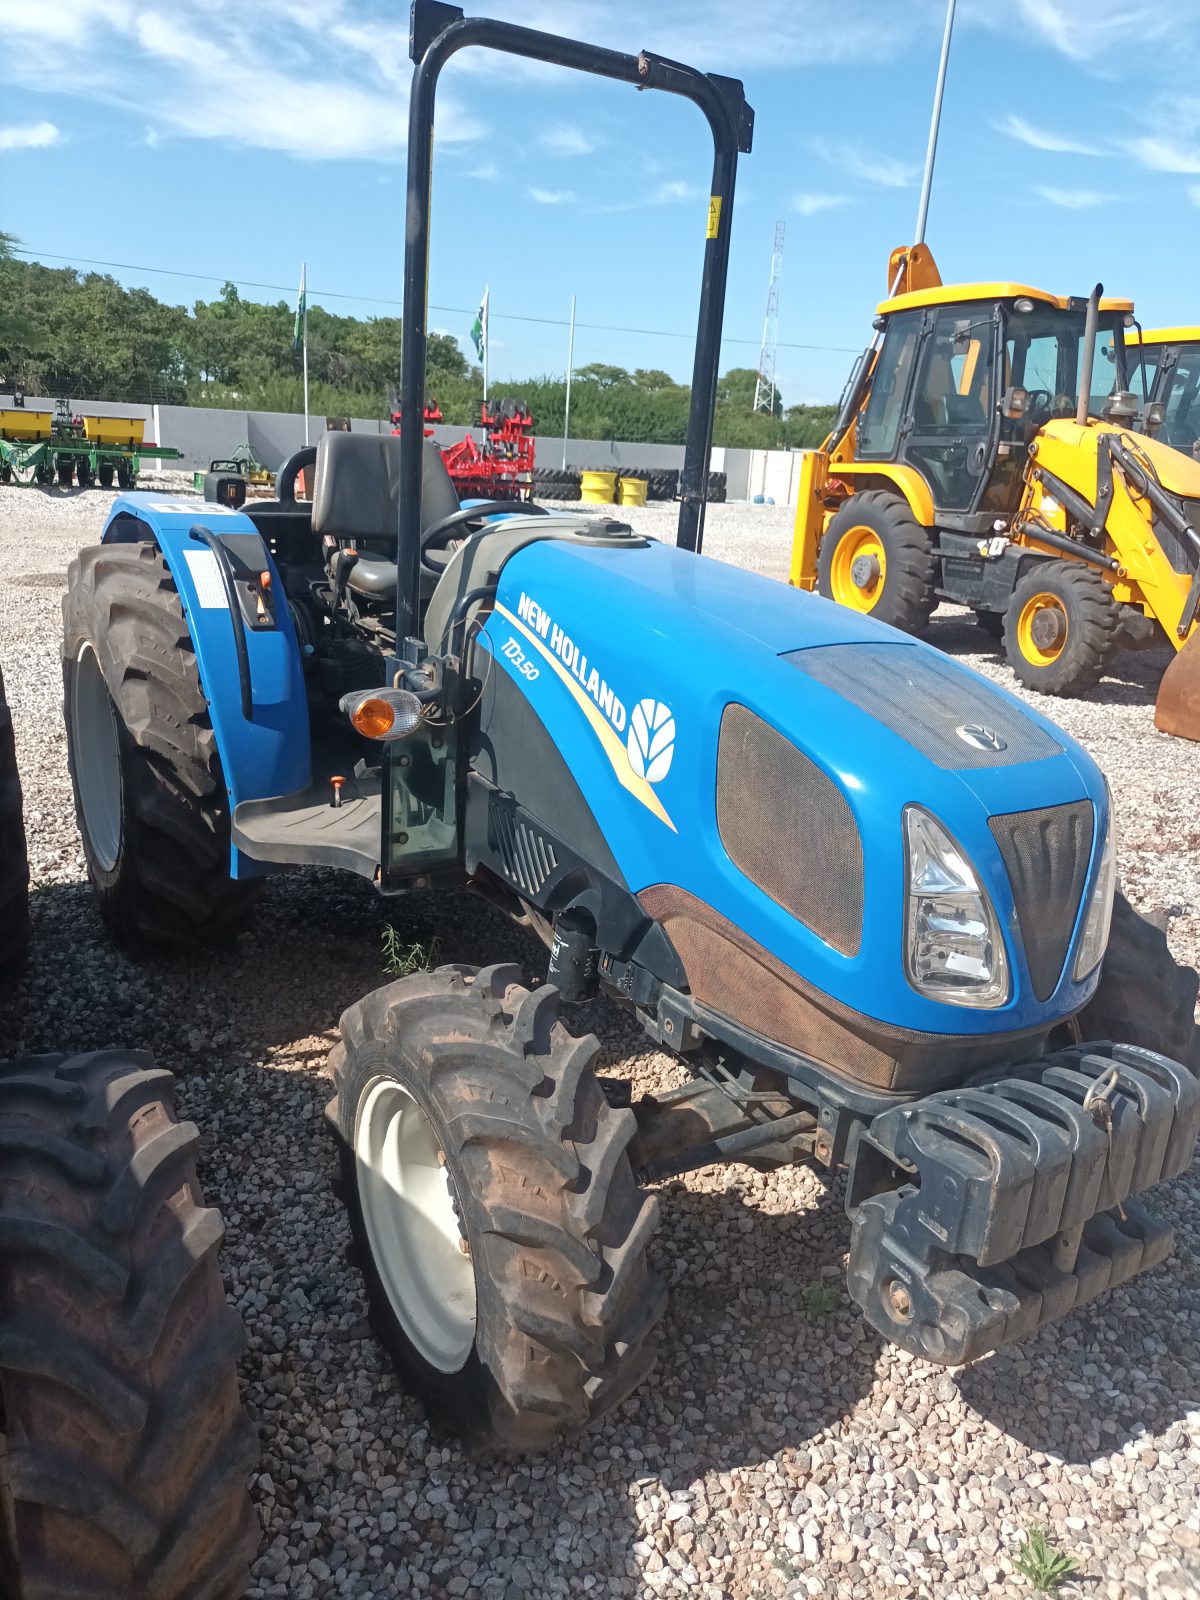 NEW HOLLAND - TD3 - For Sale at AFGRI Equipment (Marble Hall)